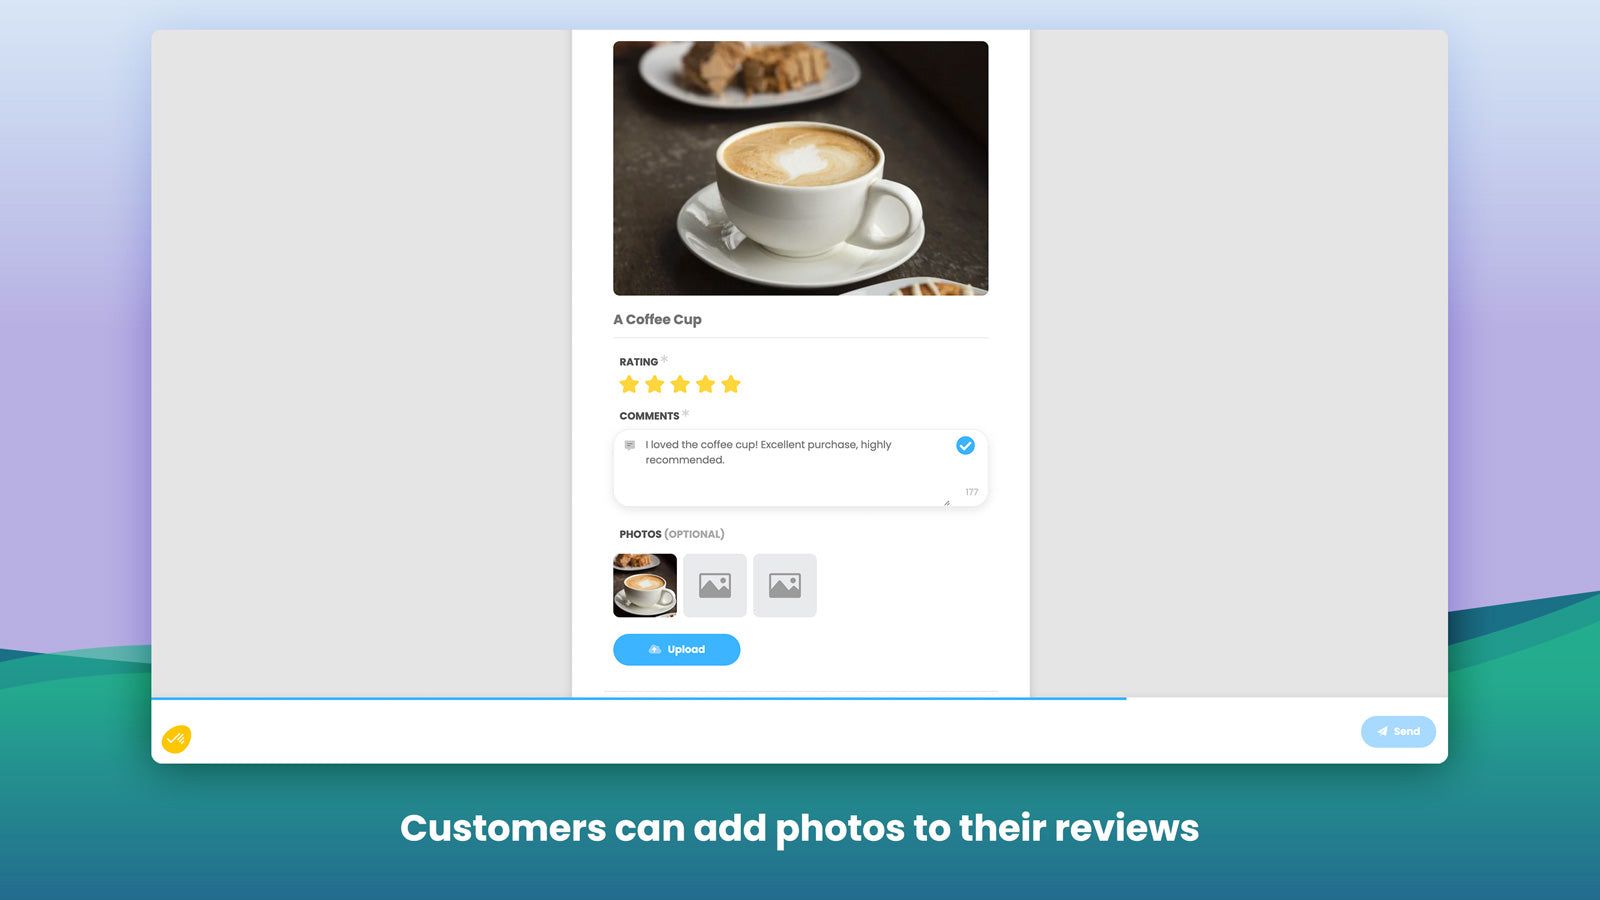 Customers can add photos to their reviews